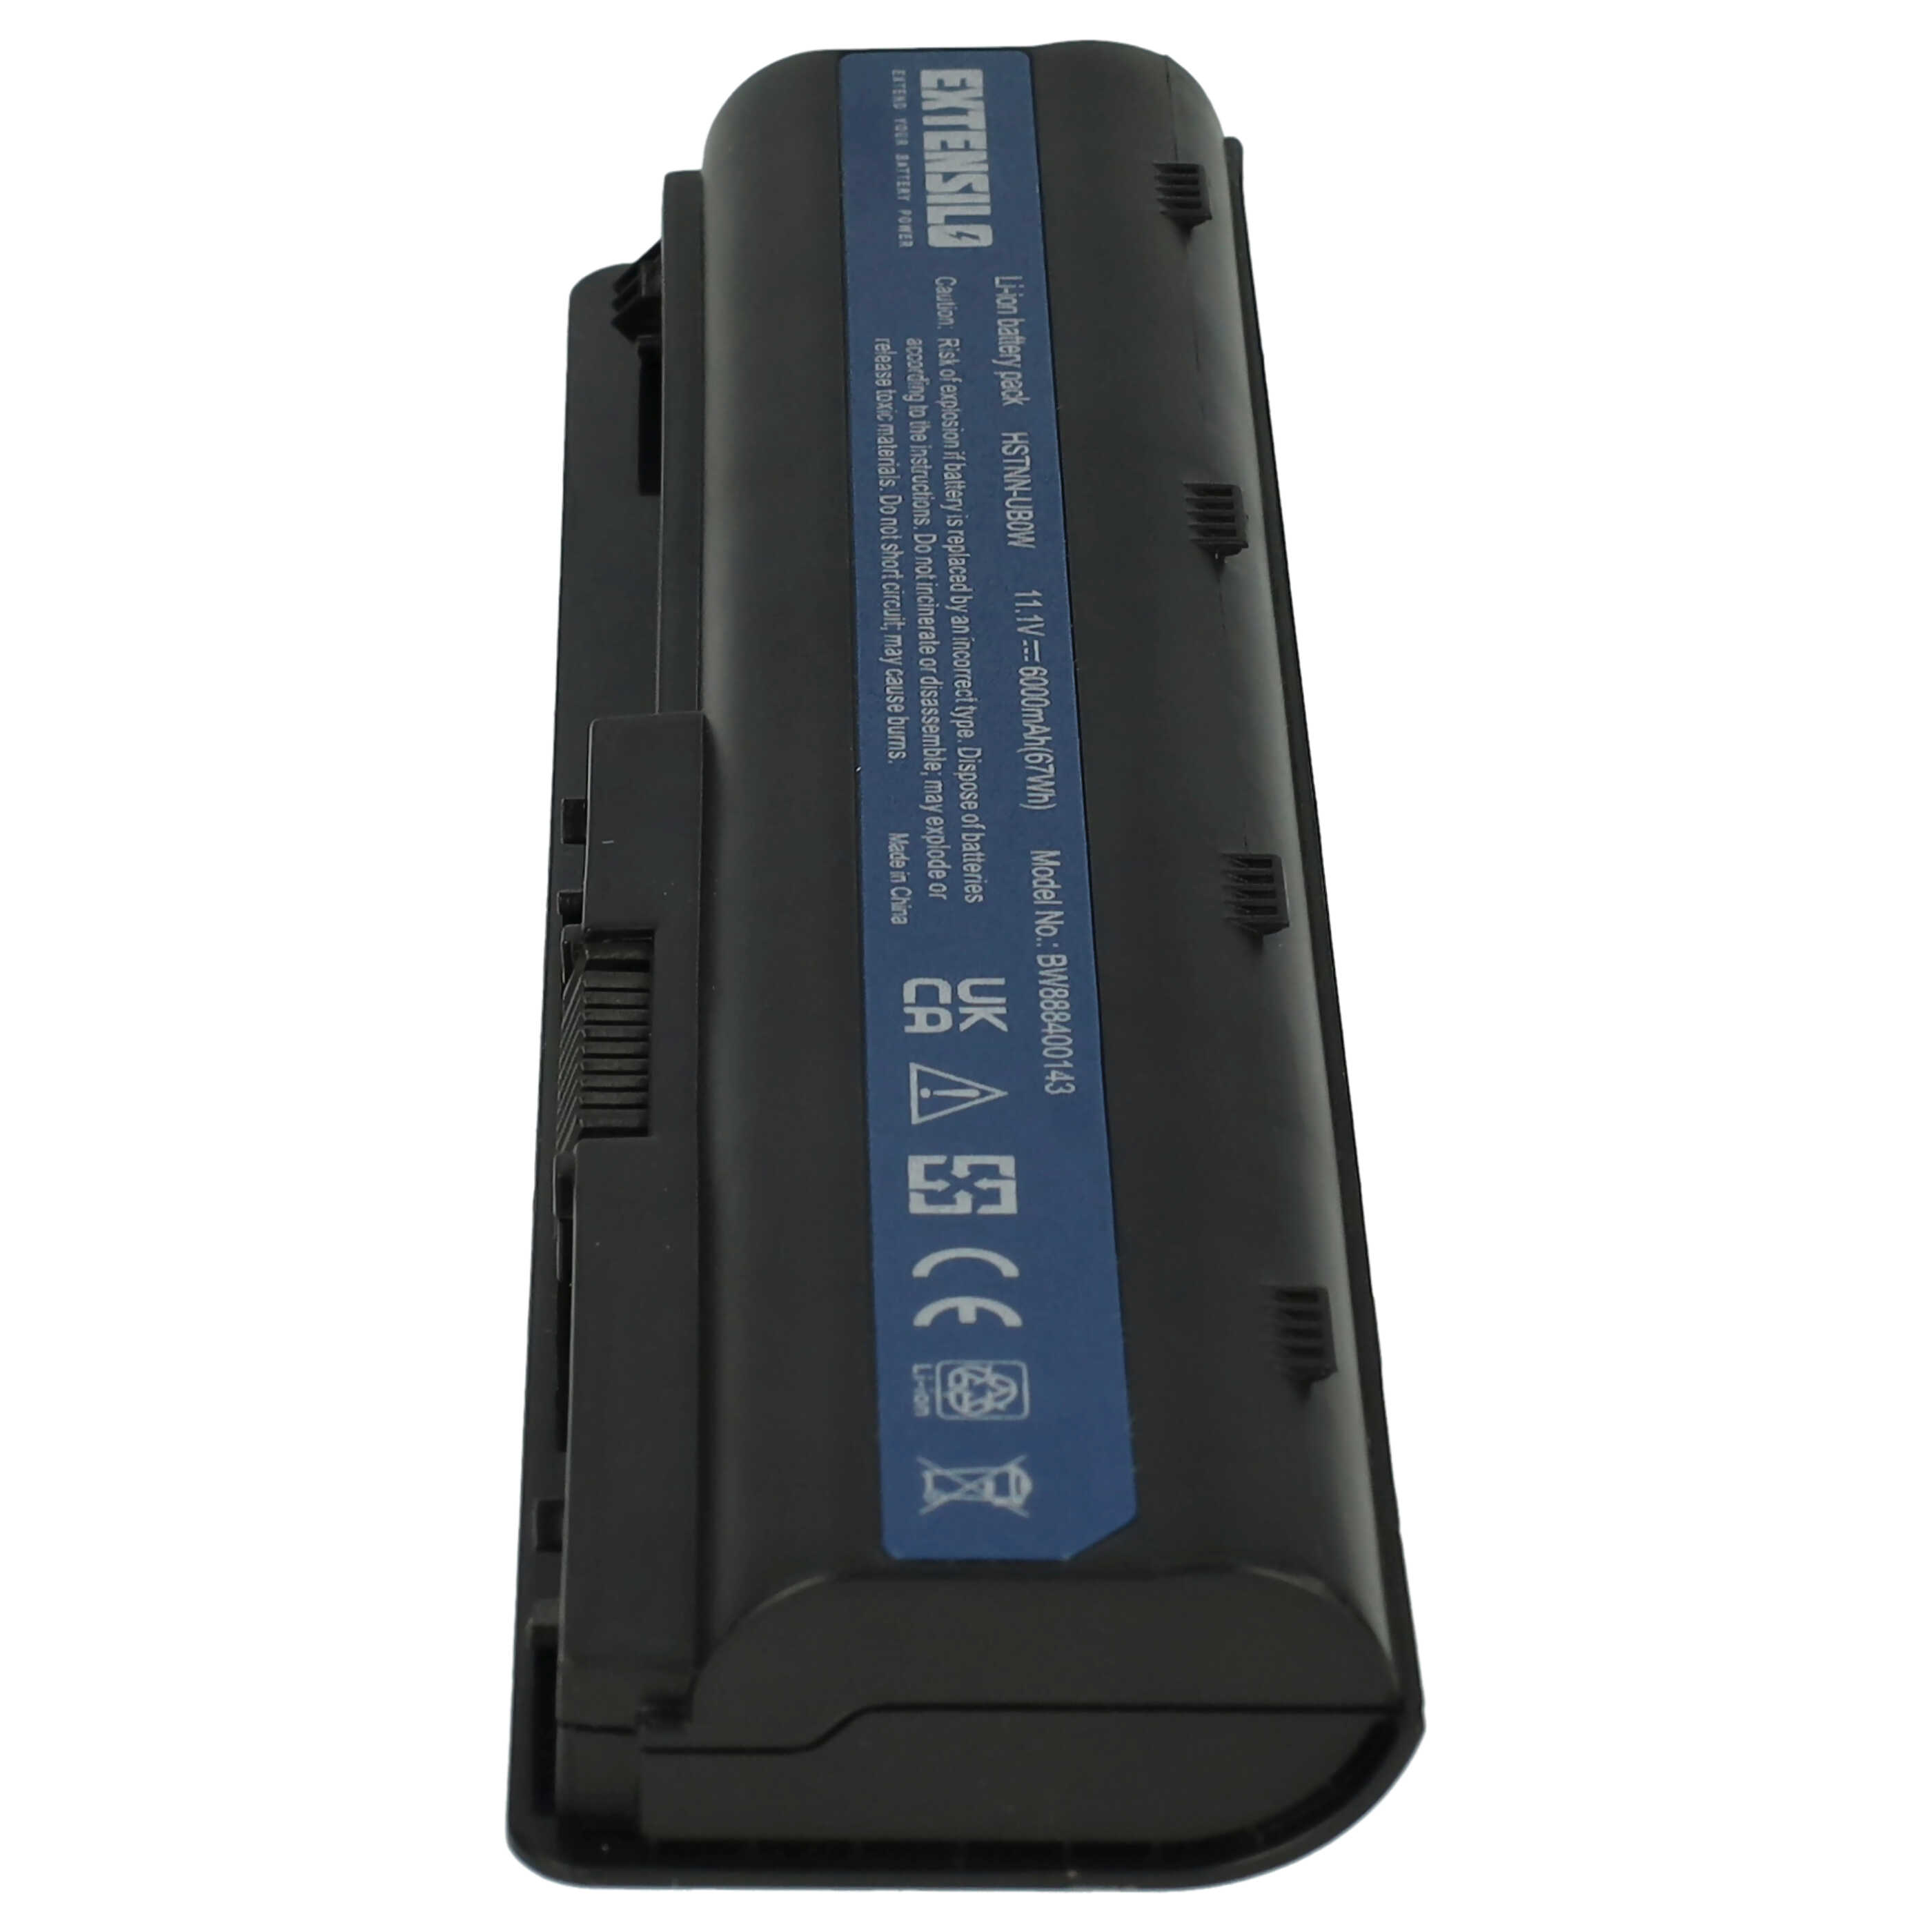 Notebook Battery Replacement for HP 588178-141, 586028-341, 586006-321, 586006-361 - 6000mAh 11.1V Li-ion